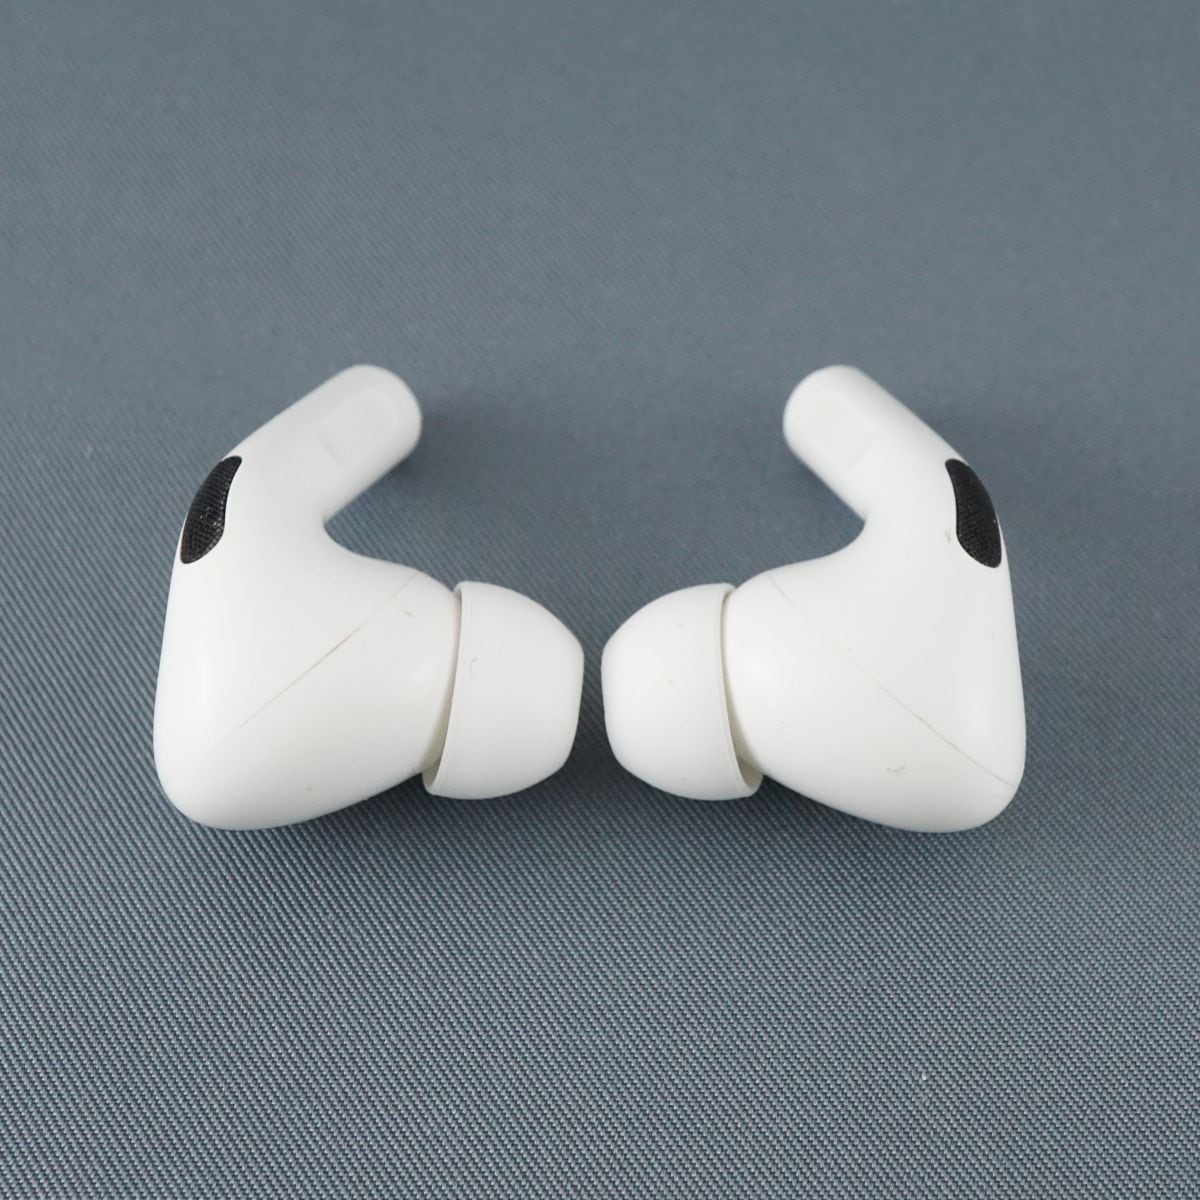 Apple AirPods Pro MagSafe充電ケース付 USED美品 第一世代 ワイヤレス